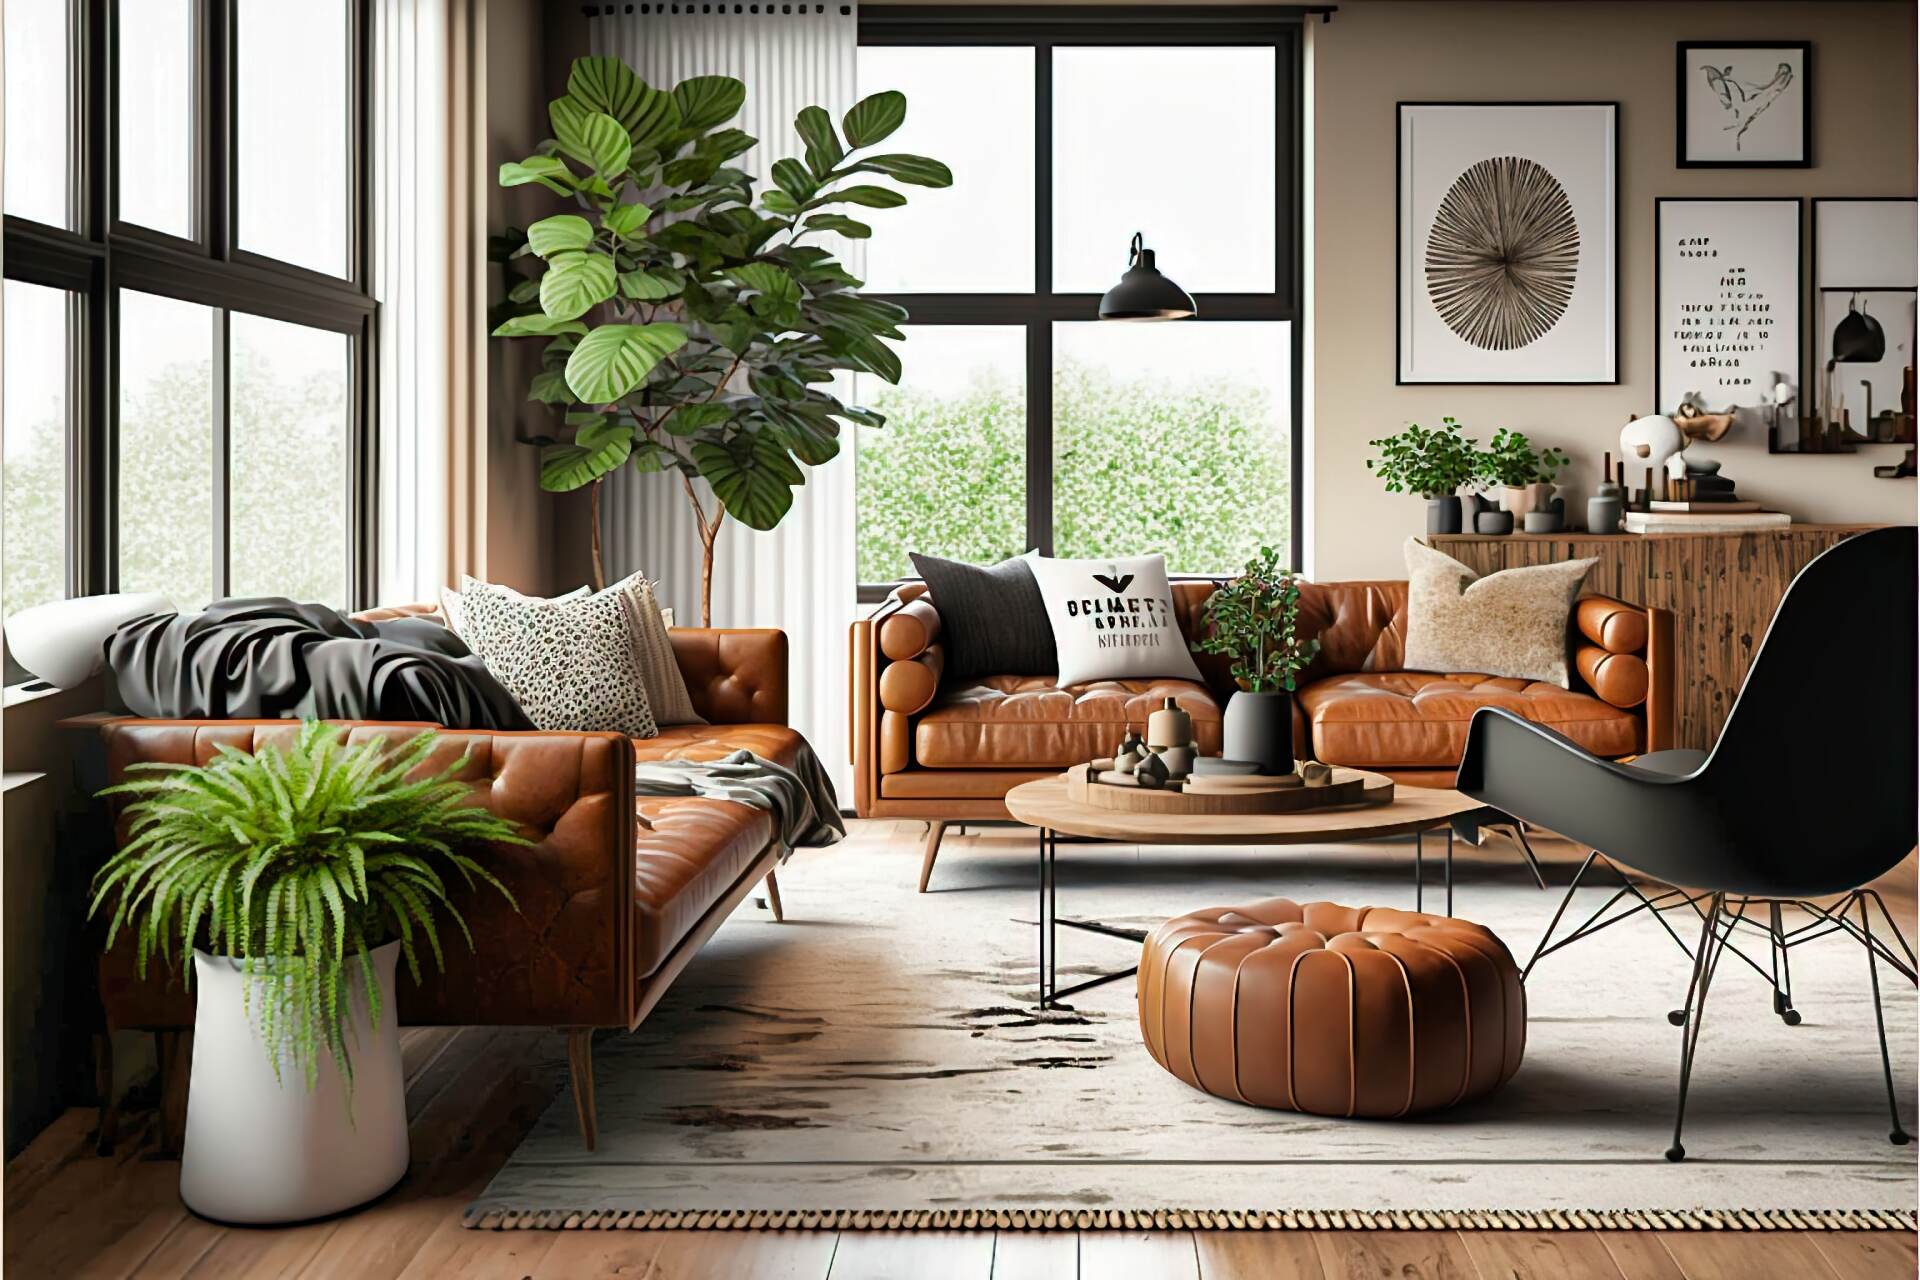 This Inviting Living Room Features Warm, Earthy Colors And Plenty Of Natural Light. A Cozy Brown Leather Armchair And A Matching Sofa Provide The Perfect Place To Relax, While A Large Wooden Coffee Table And A Vintage Rug Add Texture To The Space. A Large Potted Plant And A Few Bookshelves Complete The Look.